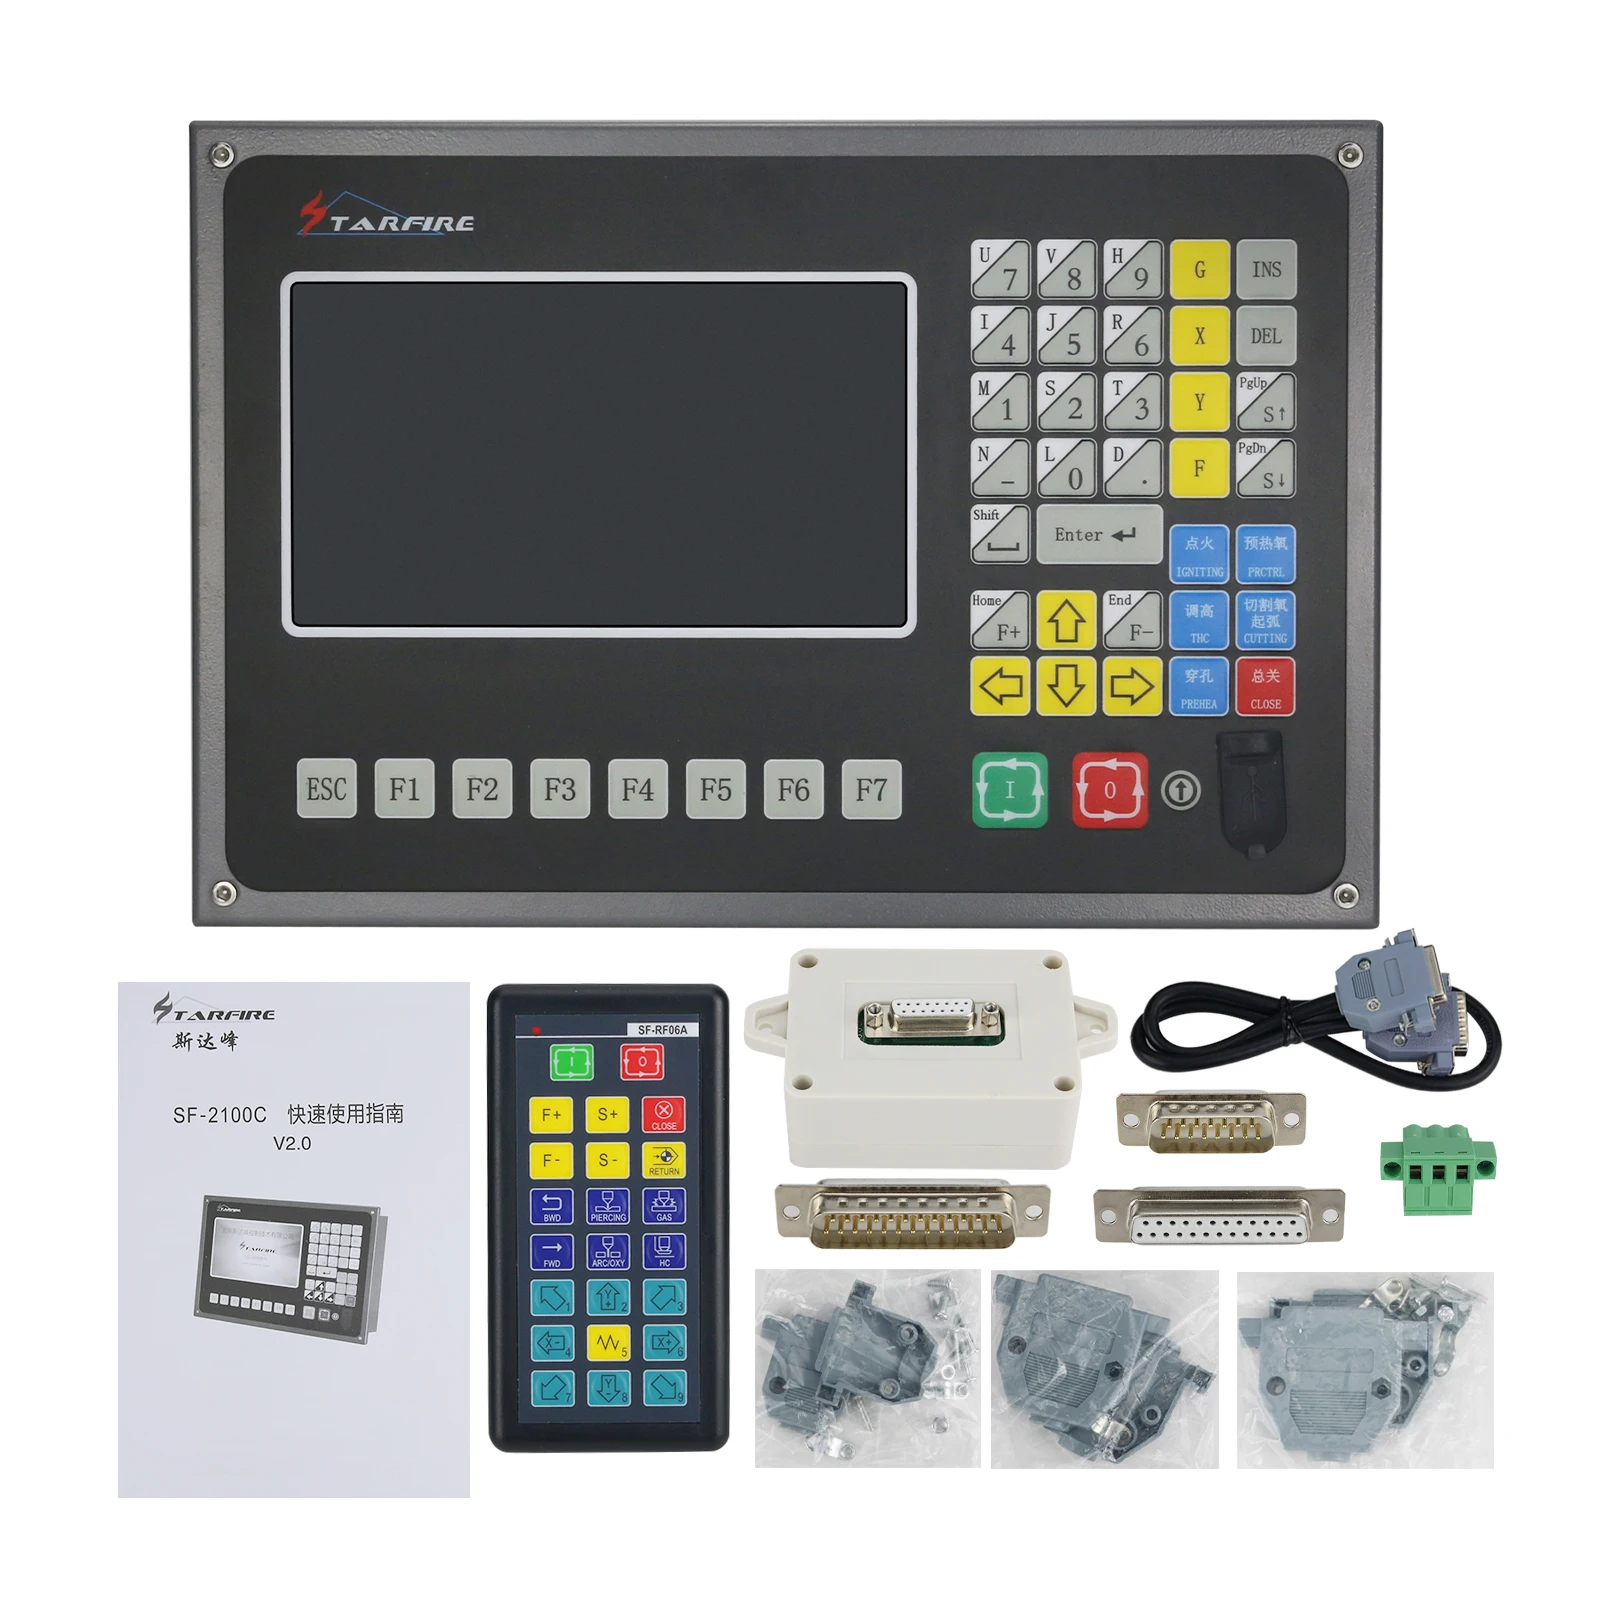 

STARFIRE 2100C CNC Control System & RF06A Remote CNC Controller for Flame Plasma Laser Cutting Machines